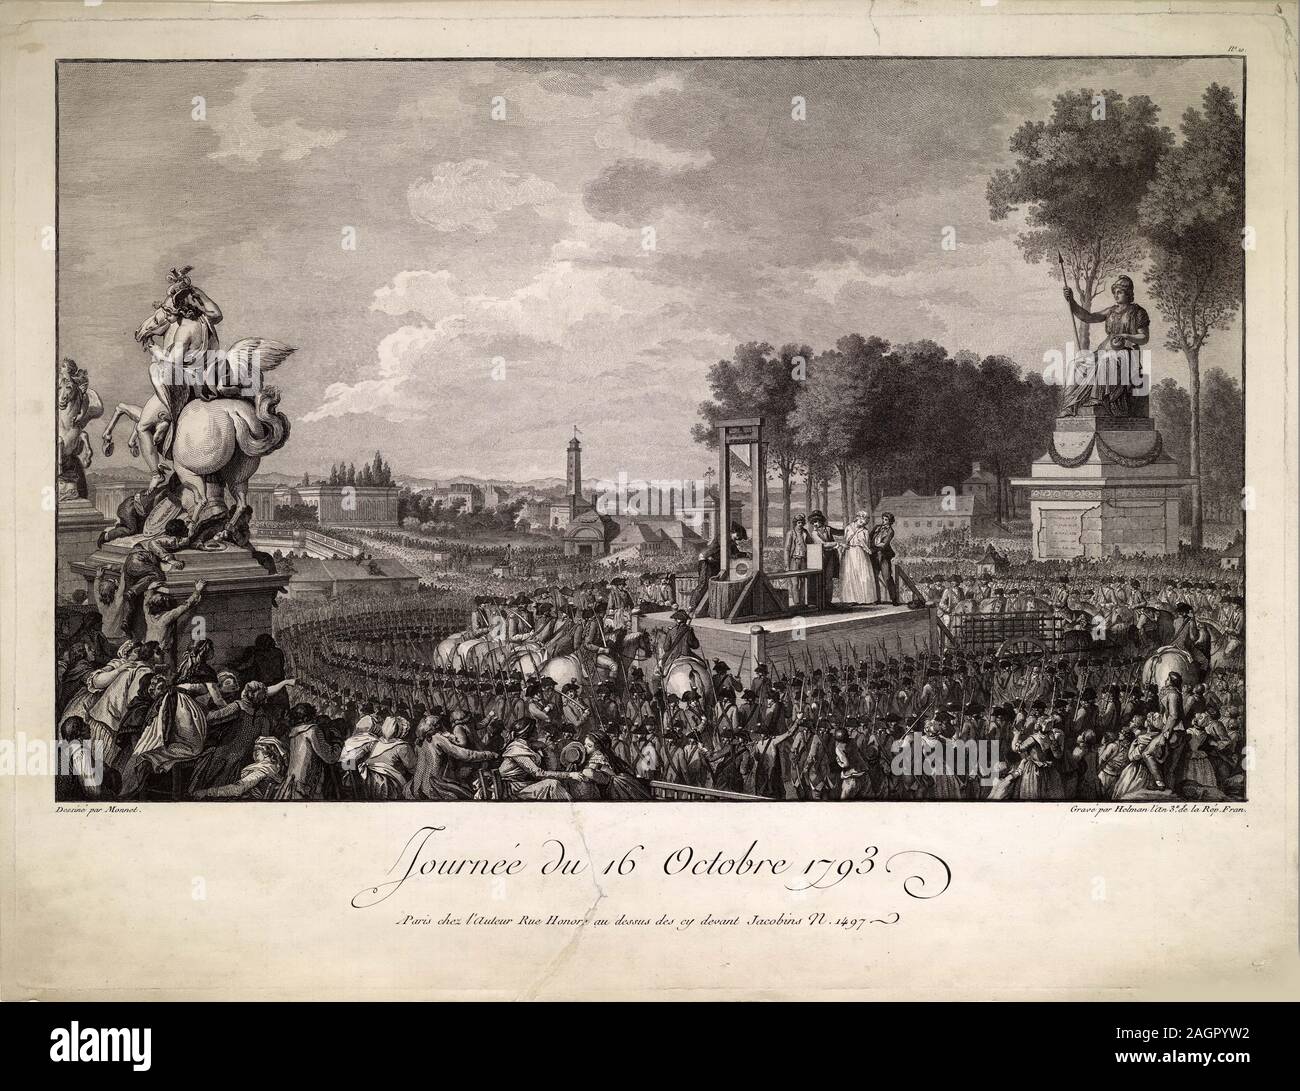 Journée du 16 octobre 1793 (The Execution of Marie Antoinette on October 16, 1793). Museum: PRIVATE COLLECTION. Author: ISIDORE STANISLAS HELMAN. Stock Photo